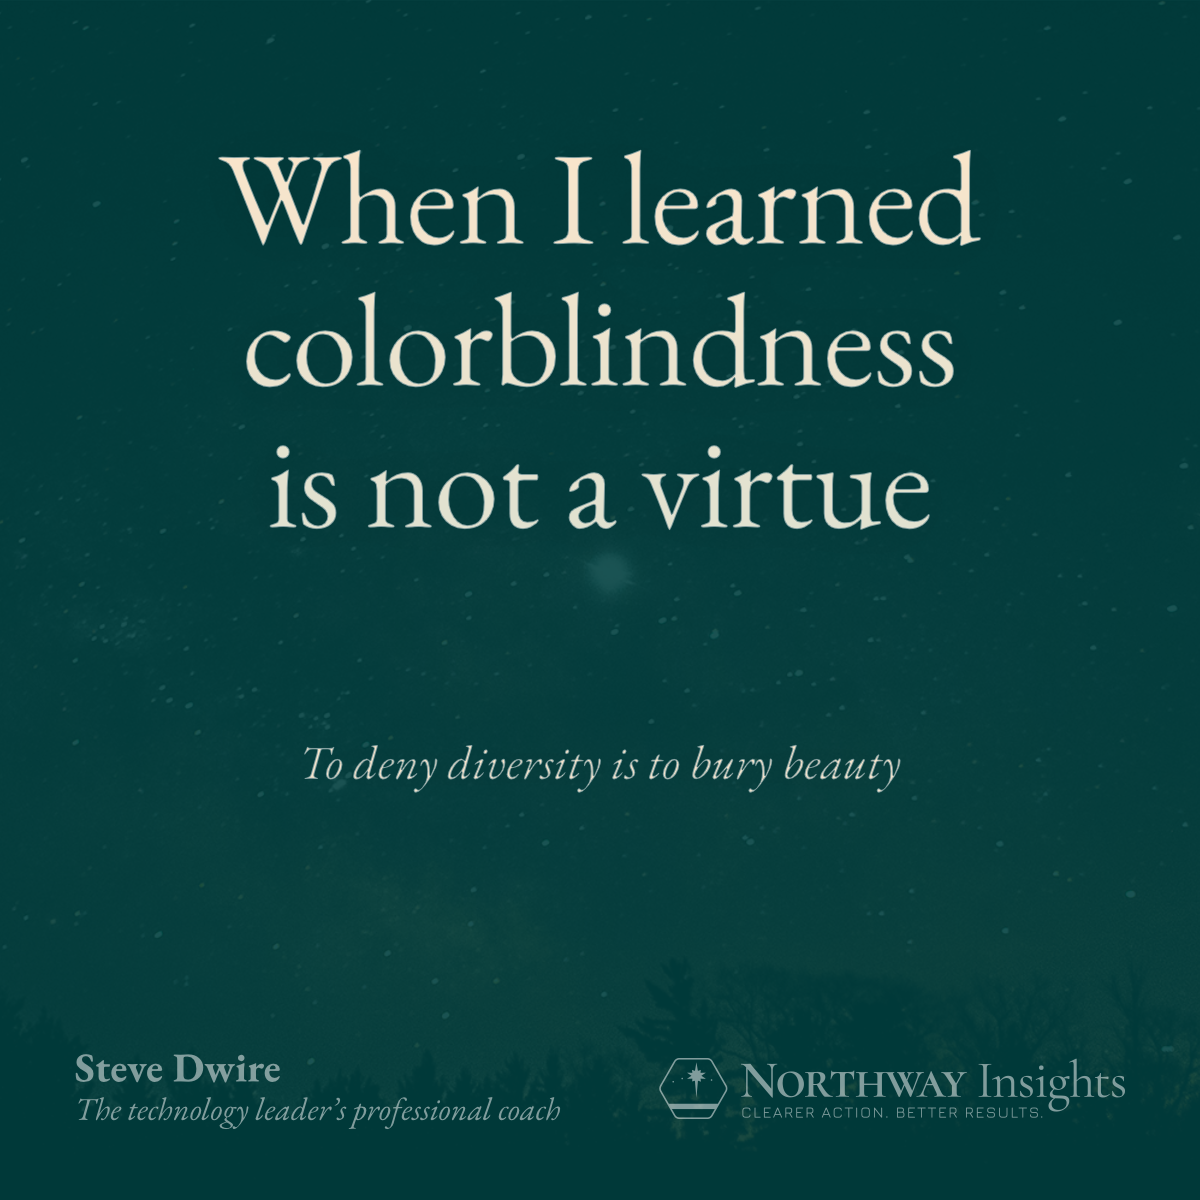 When I learned colorblindness is not a virtue